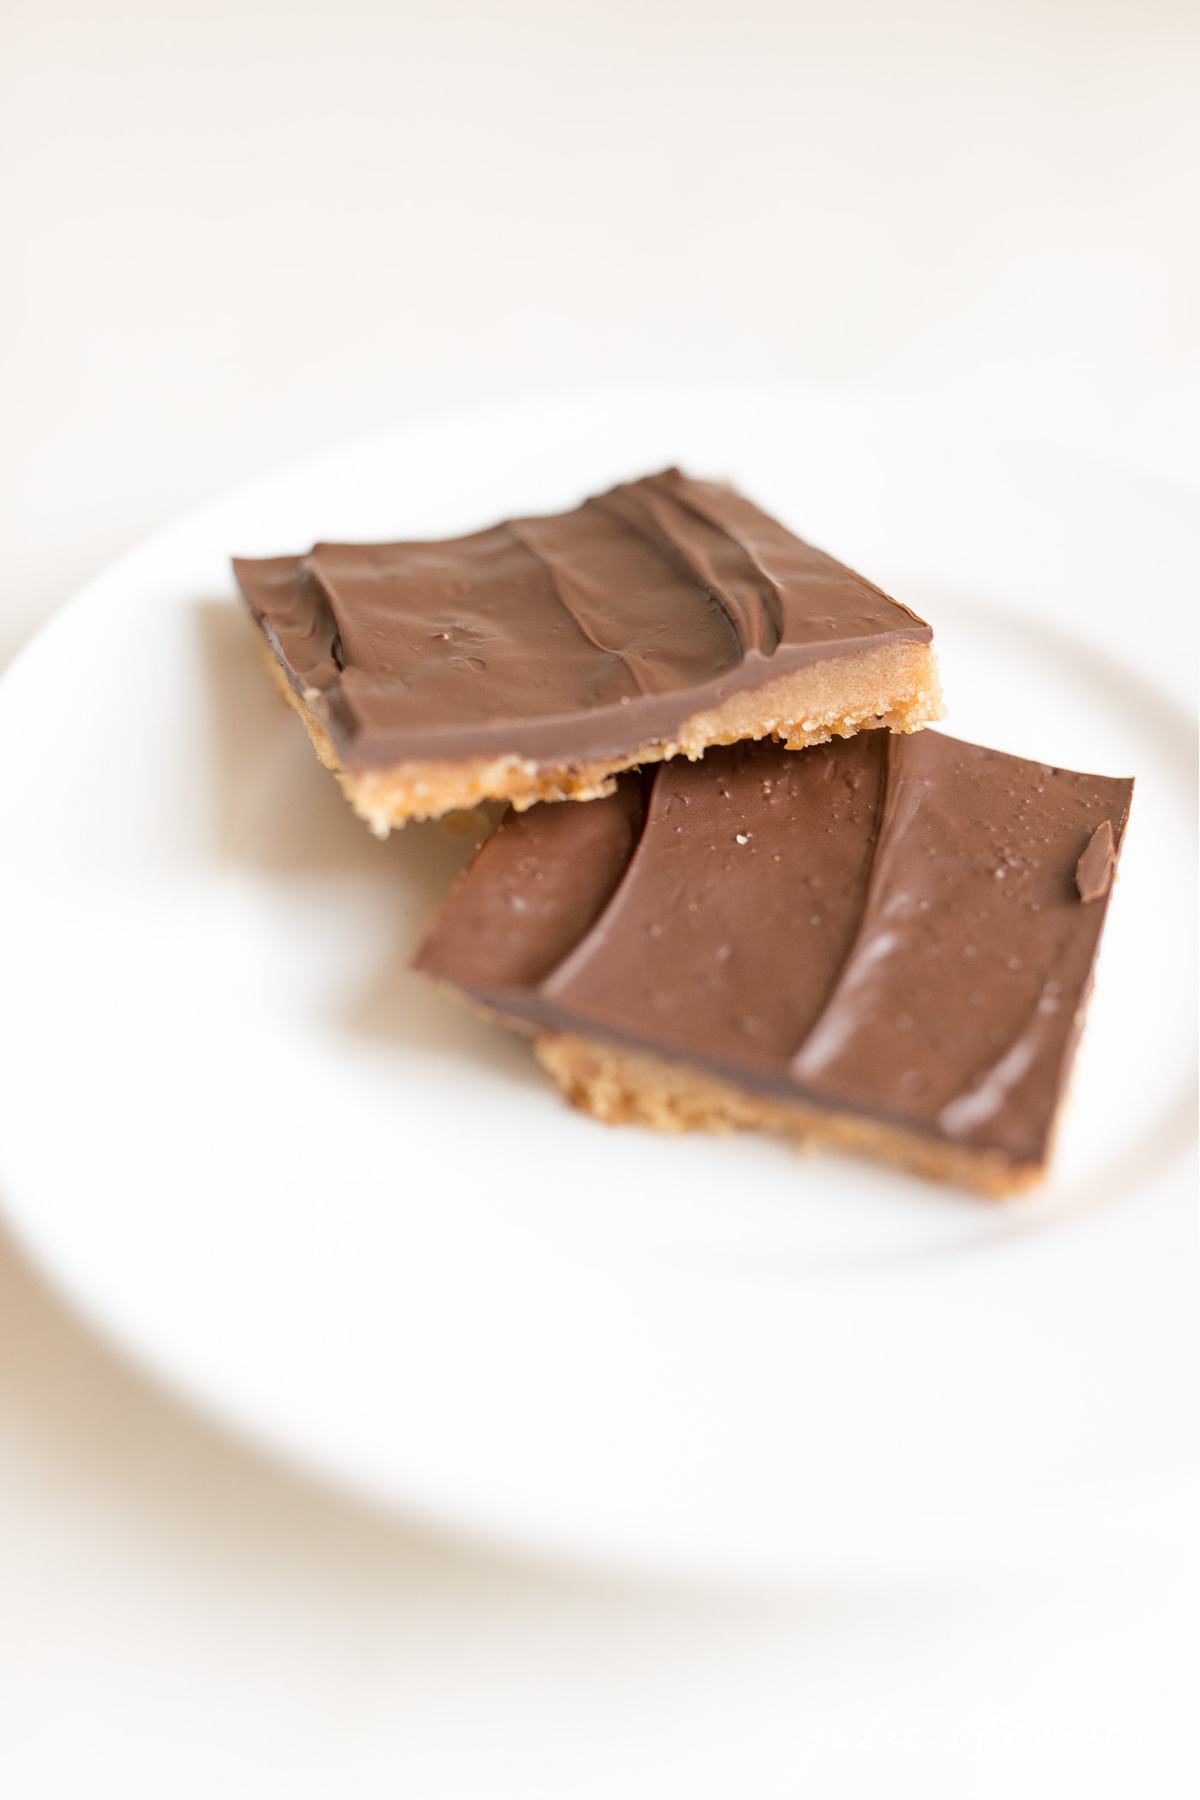 Two pieces of saltine cracker toffee on a white plate